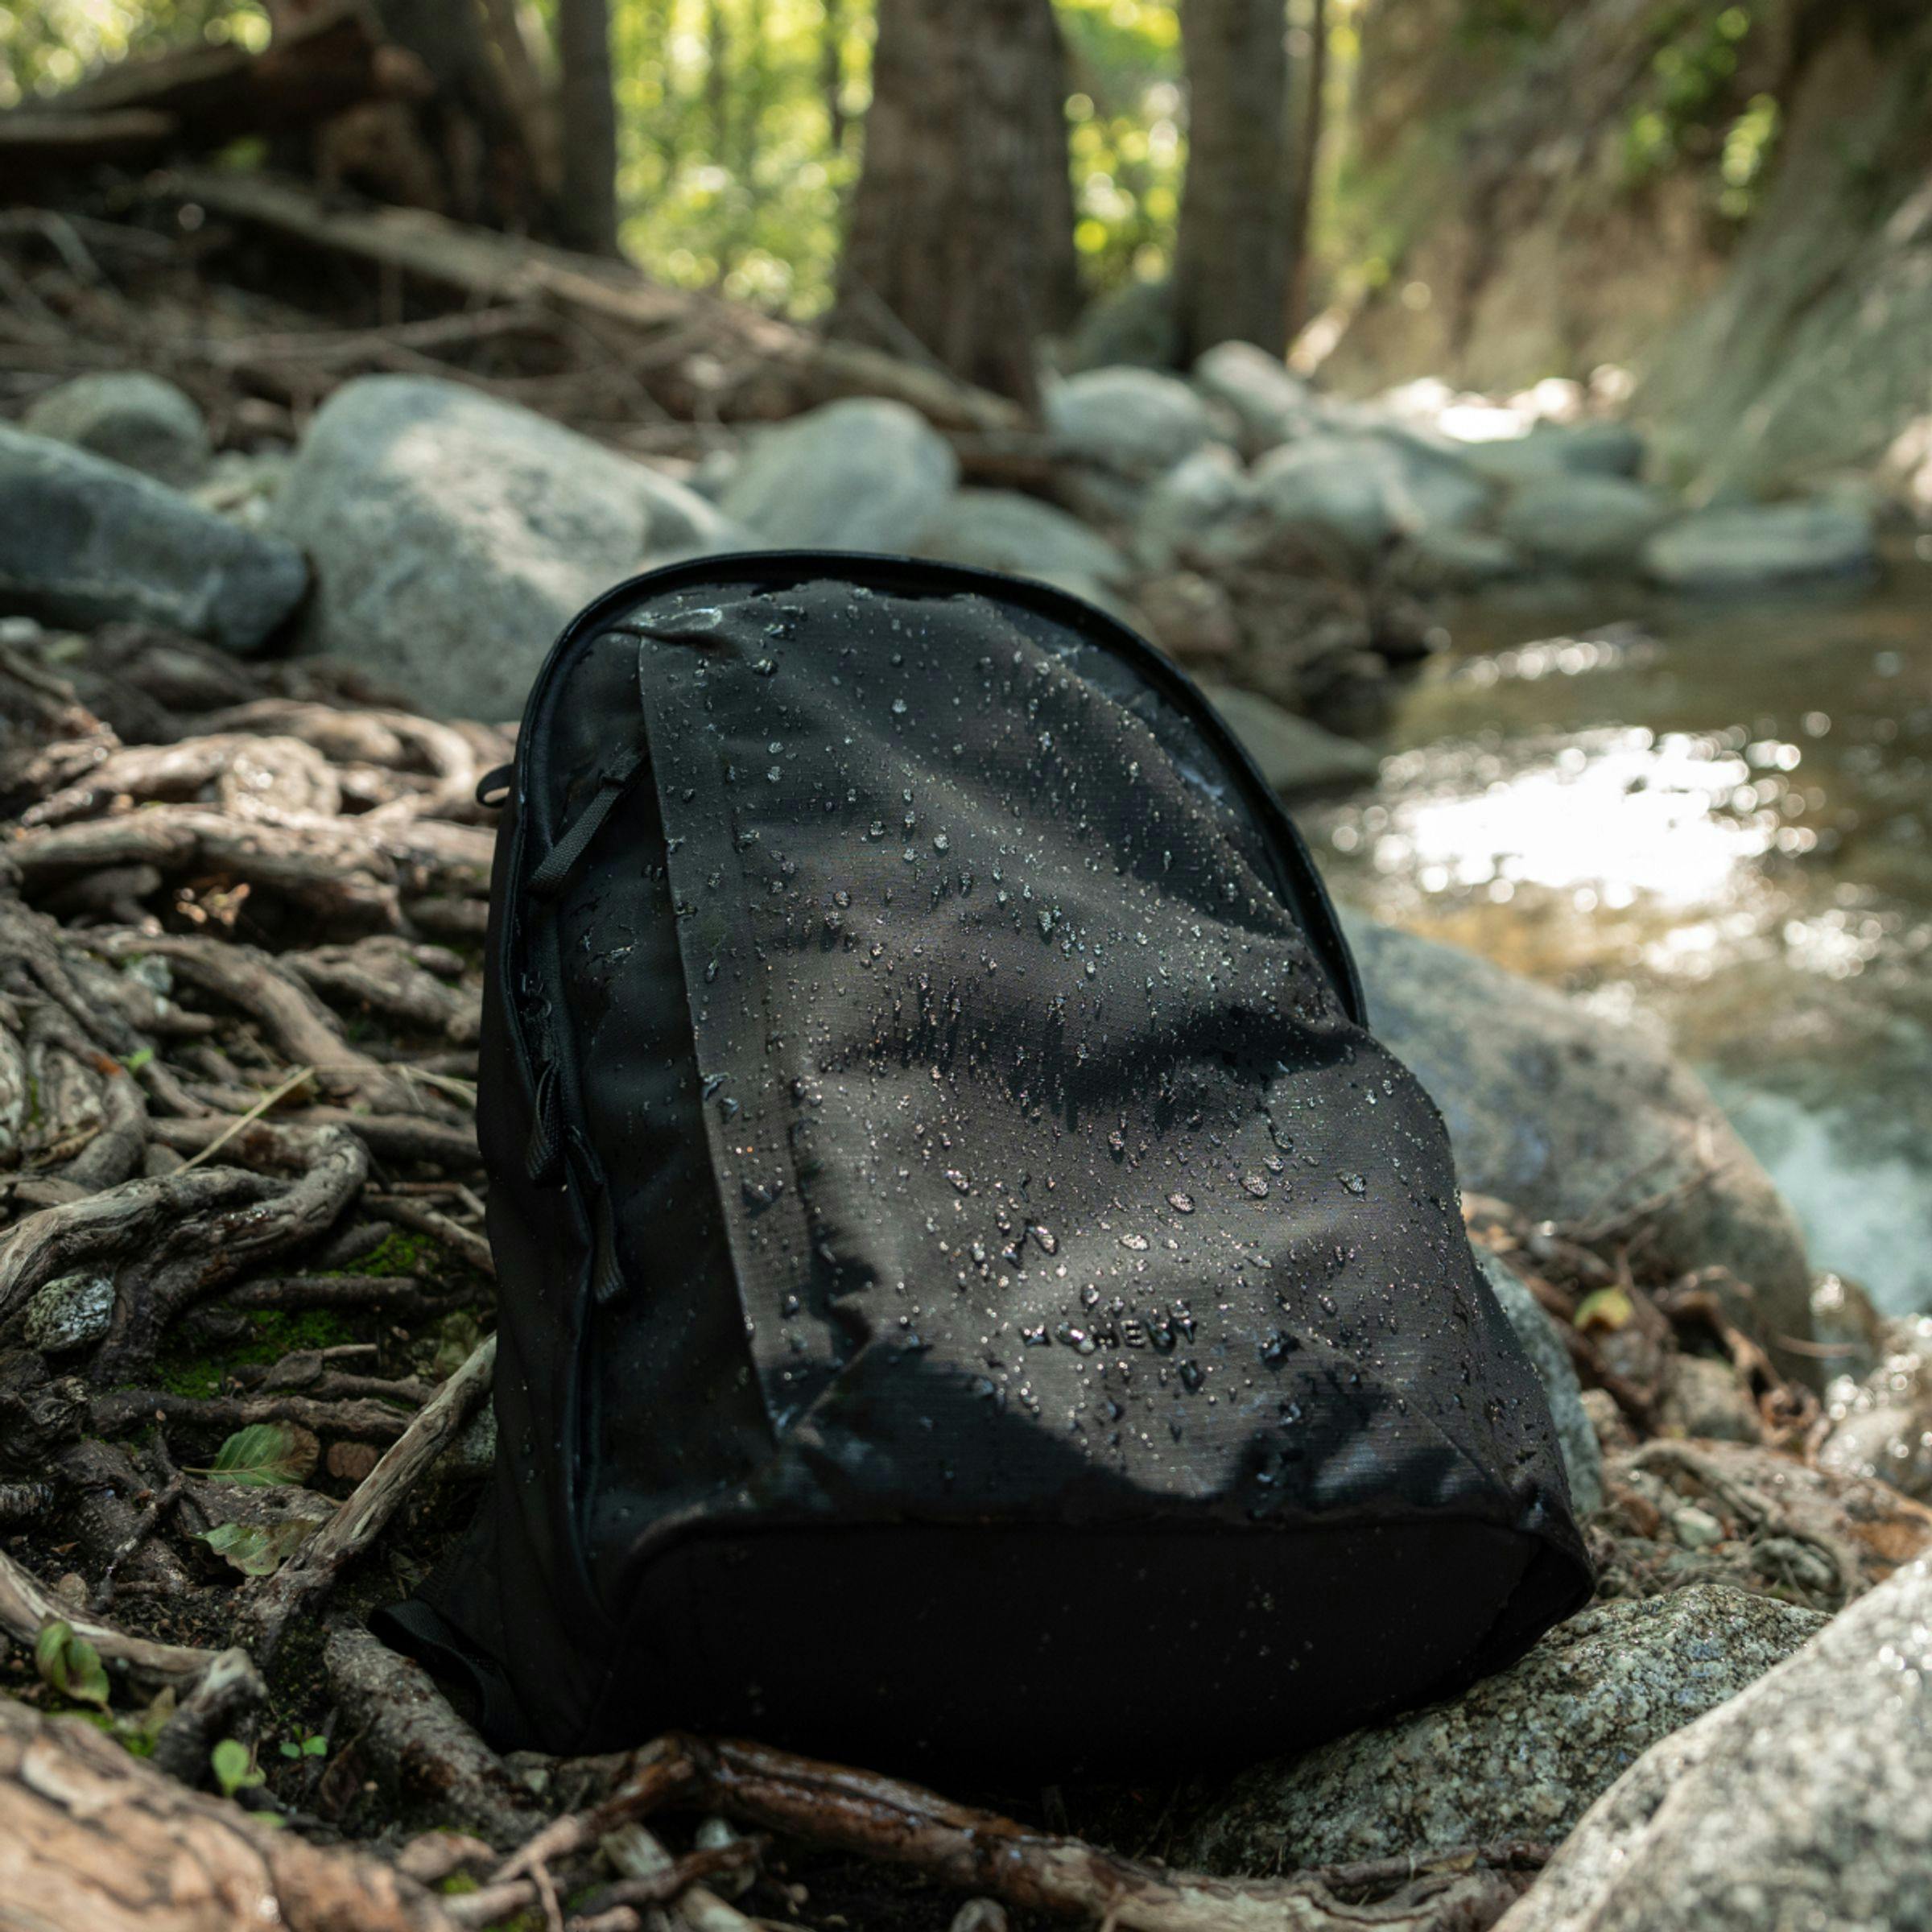 Everything Backpack in the wild under a light rainfall showing durability.